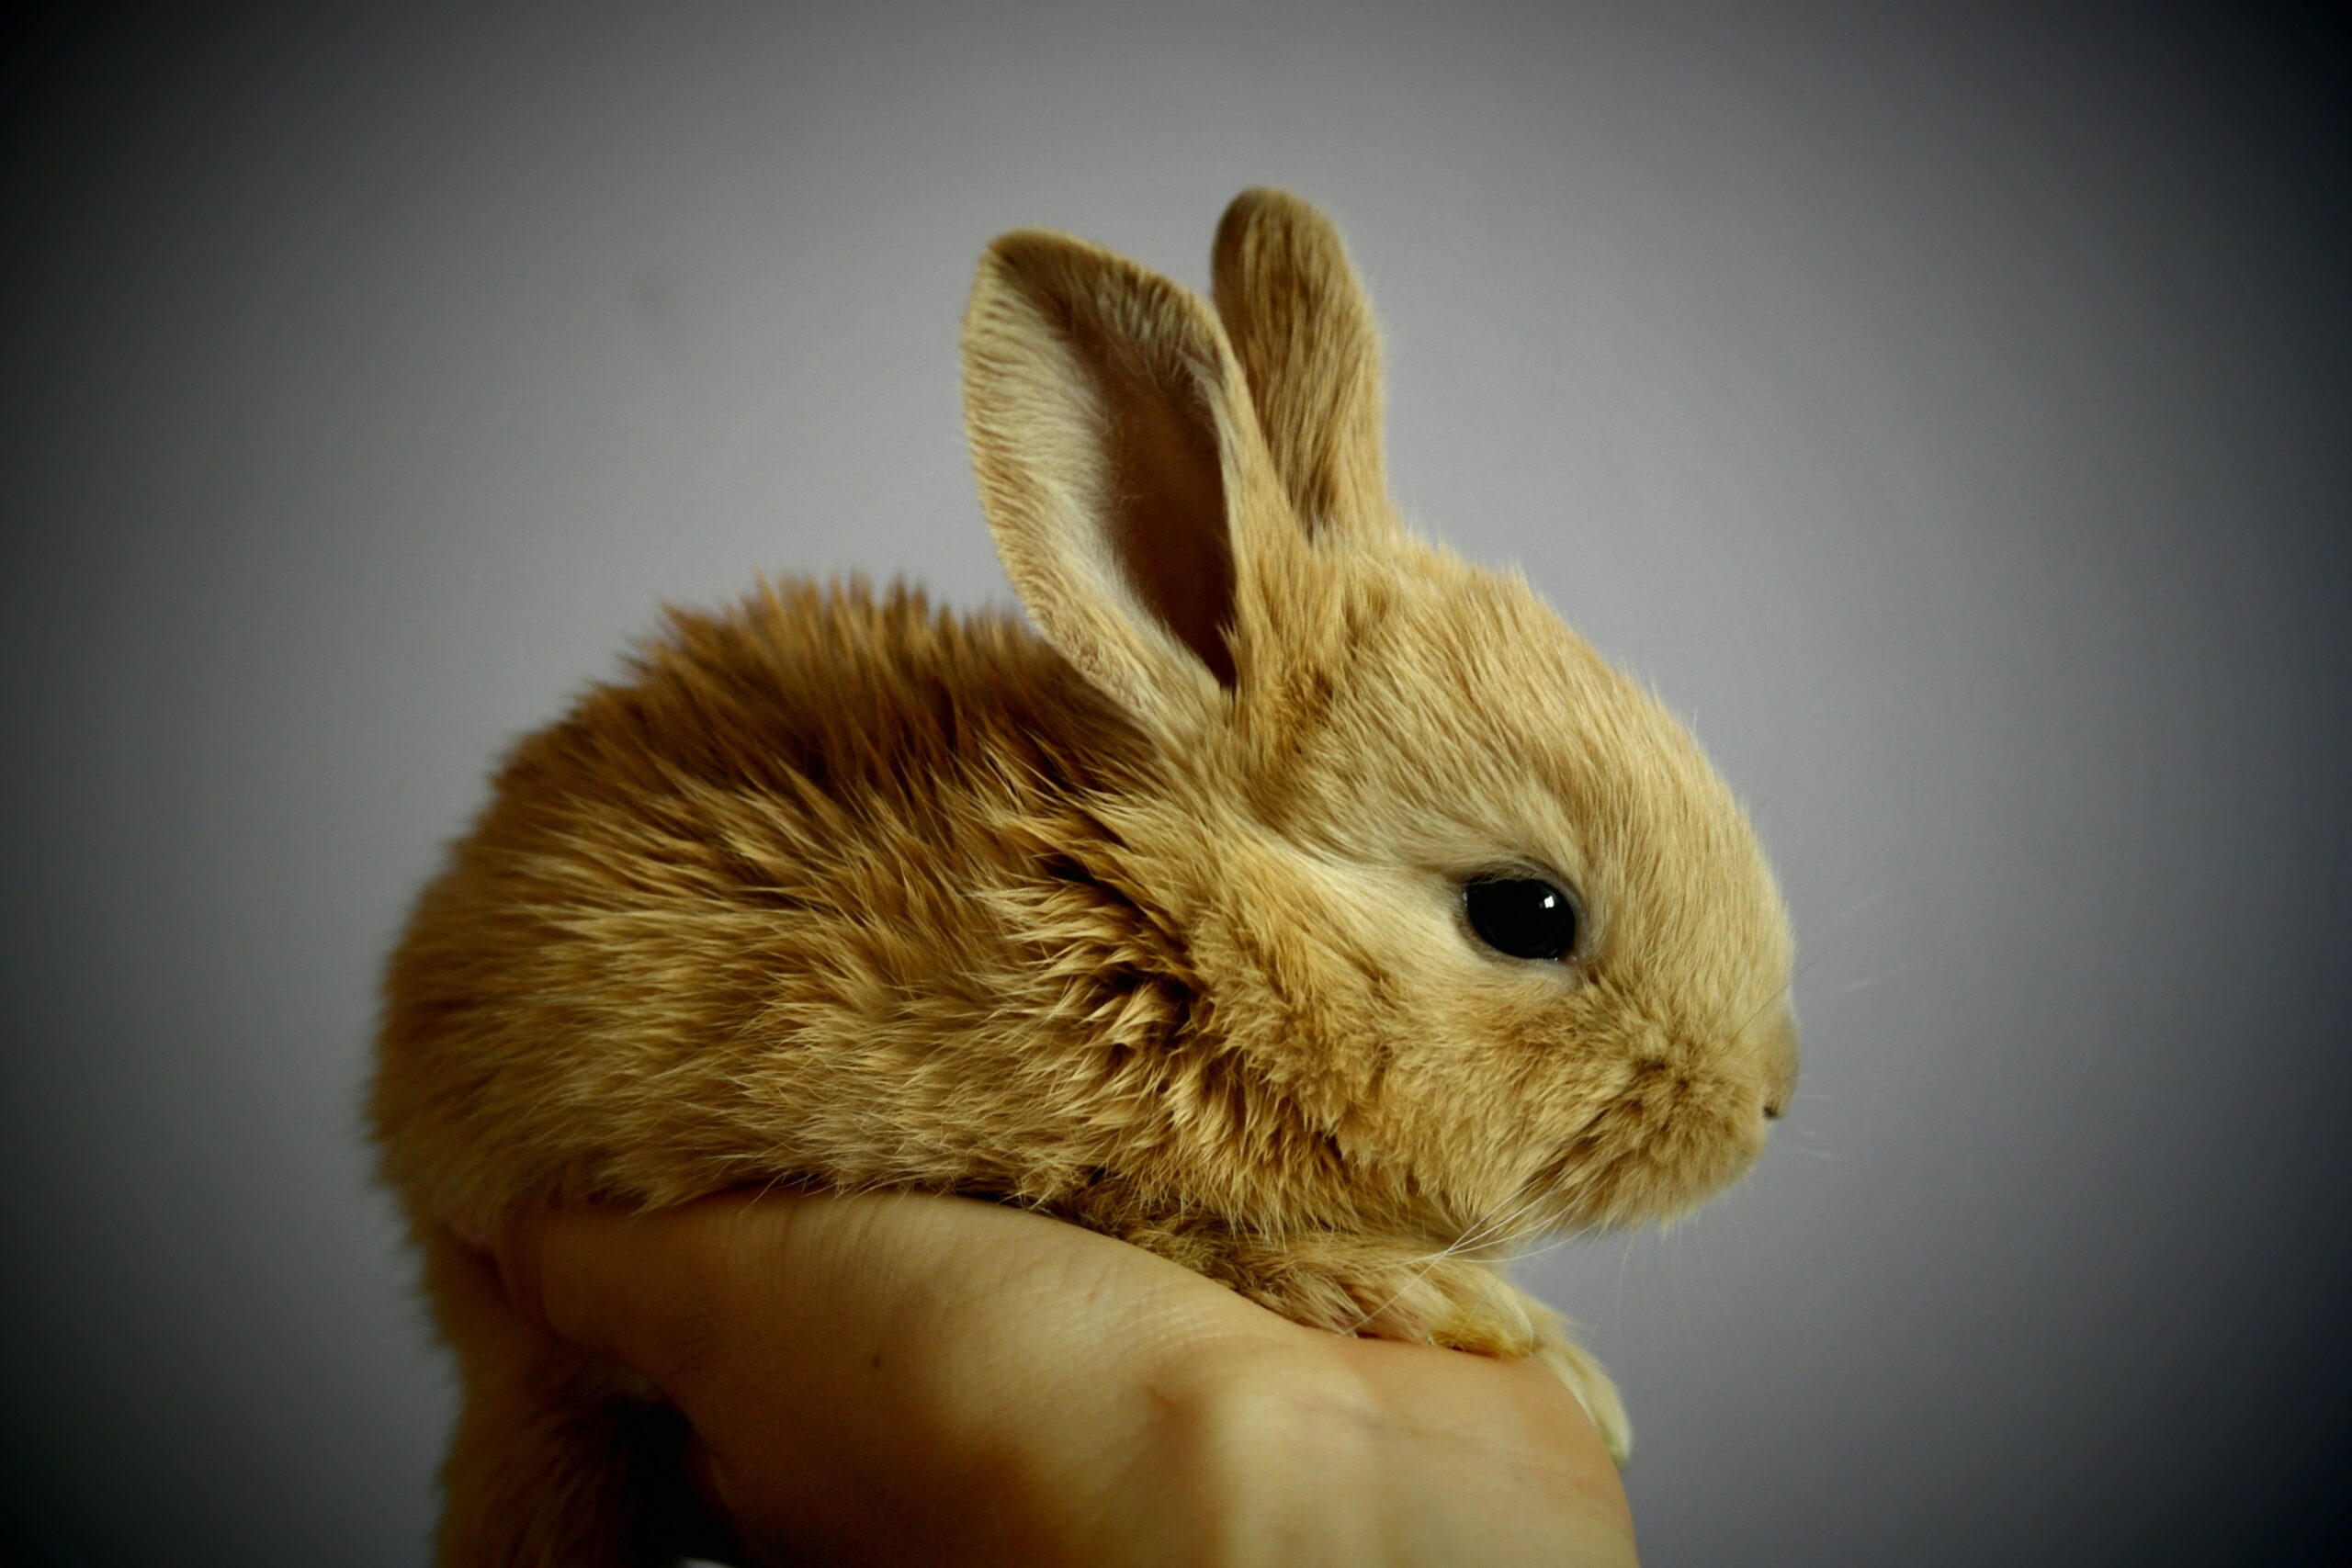 The origin story of domesticated rabbits may be all wrong